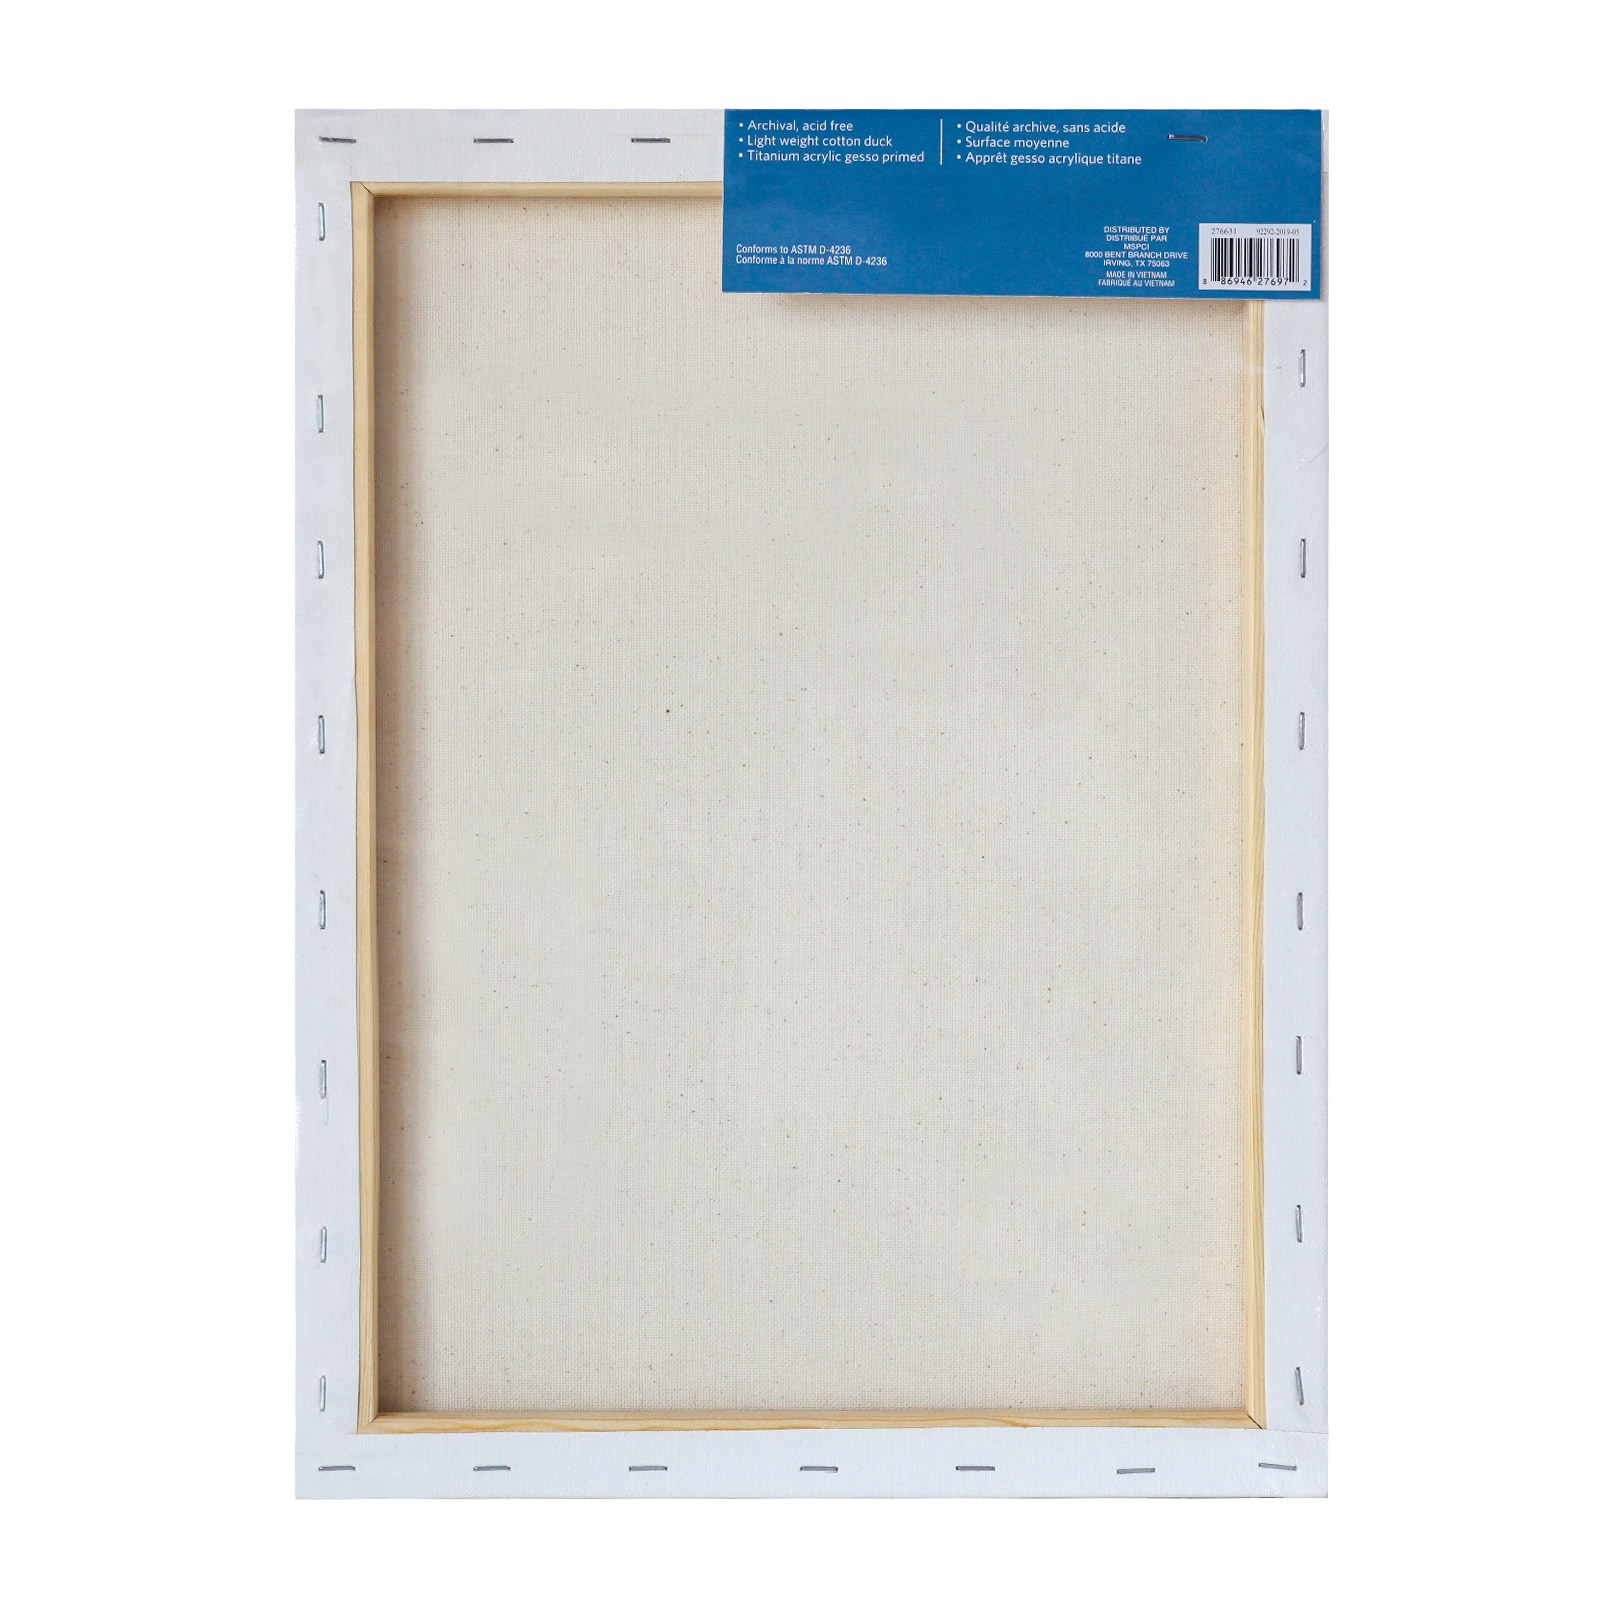  Academy Art Supply Canvases Panels 8 x 10 inch - 100% Cotton  Artist Blank Canvas Board for Painting, Pre-gessoed, Primed, Acid-Free  Blank Canvas, Perfect for Acrylic and Oil Painting, Pack of